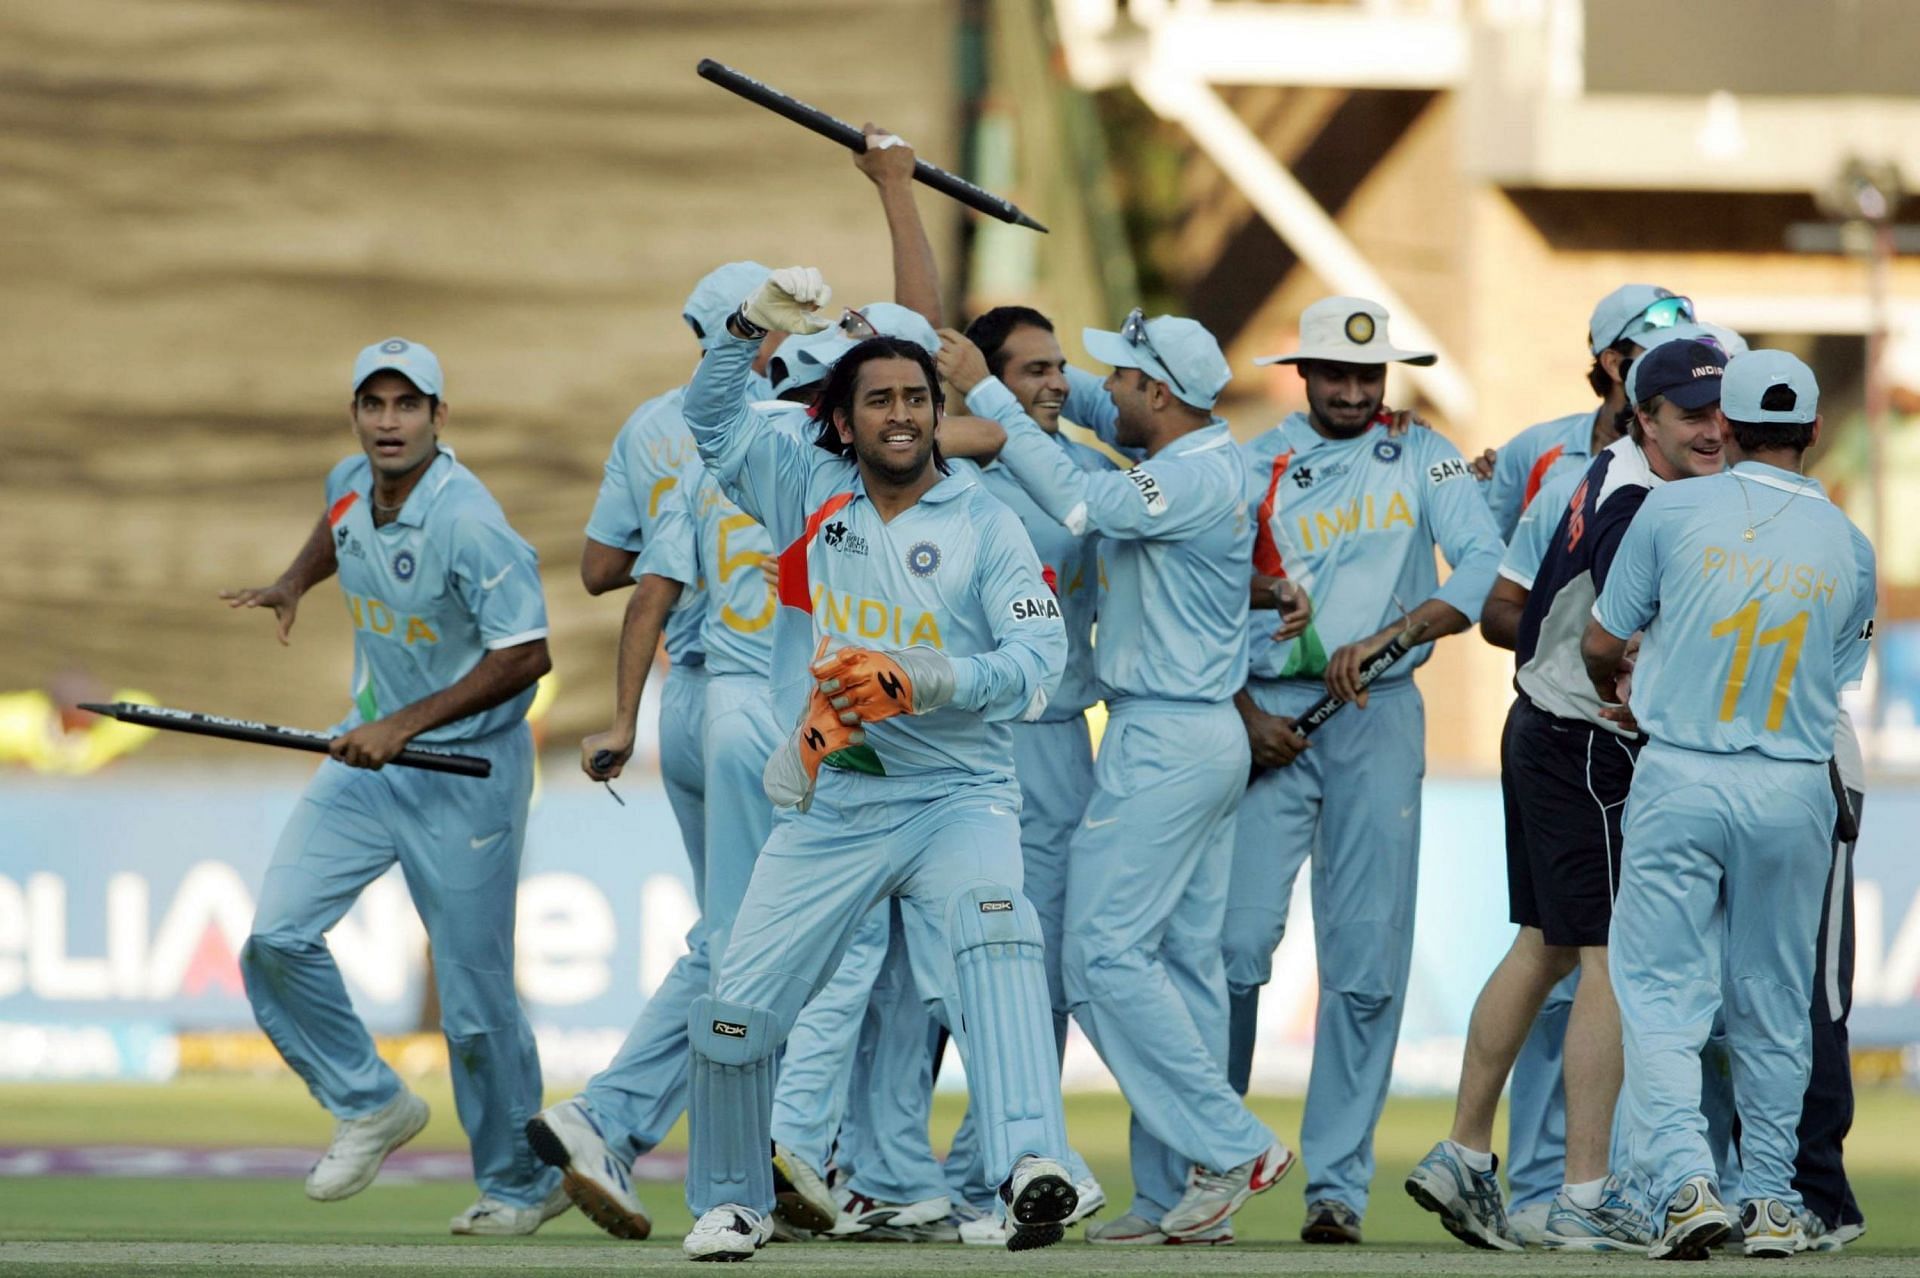 India won the ICC T20 World Cup 2007 under the captaincy of MS Dhoni